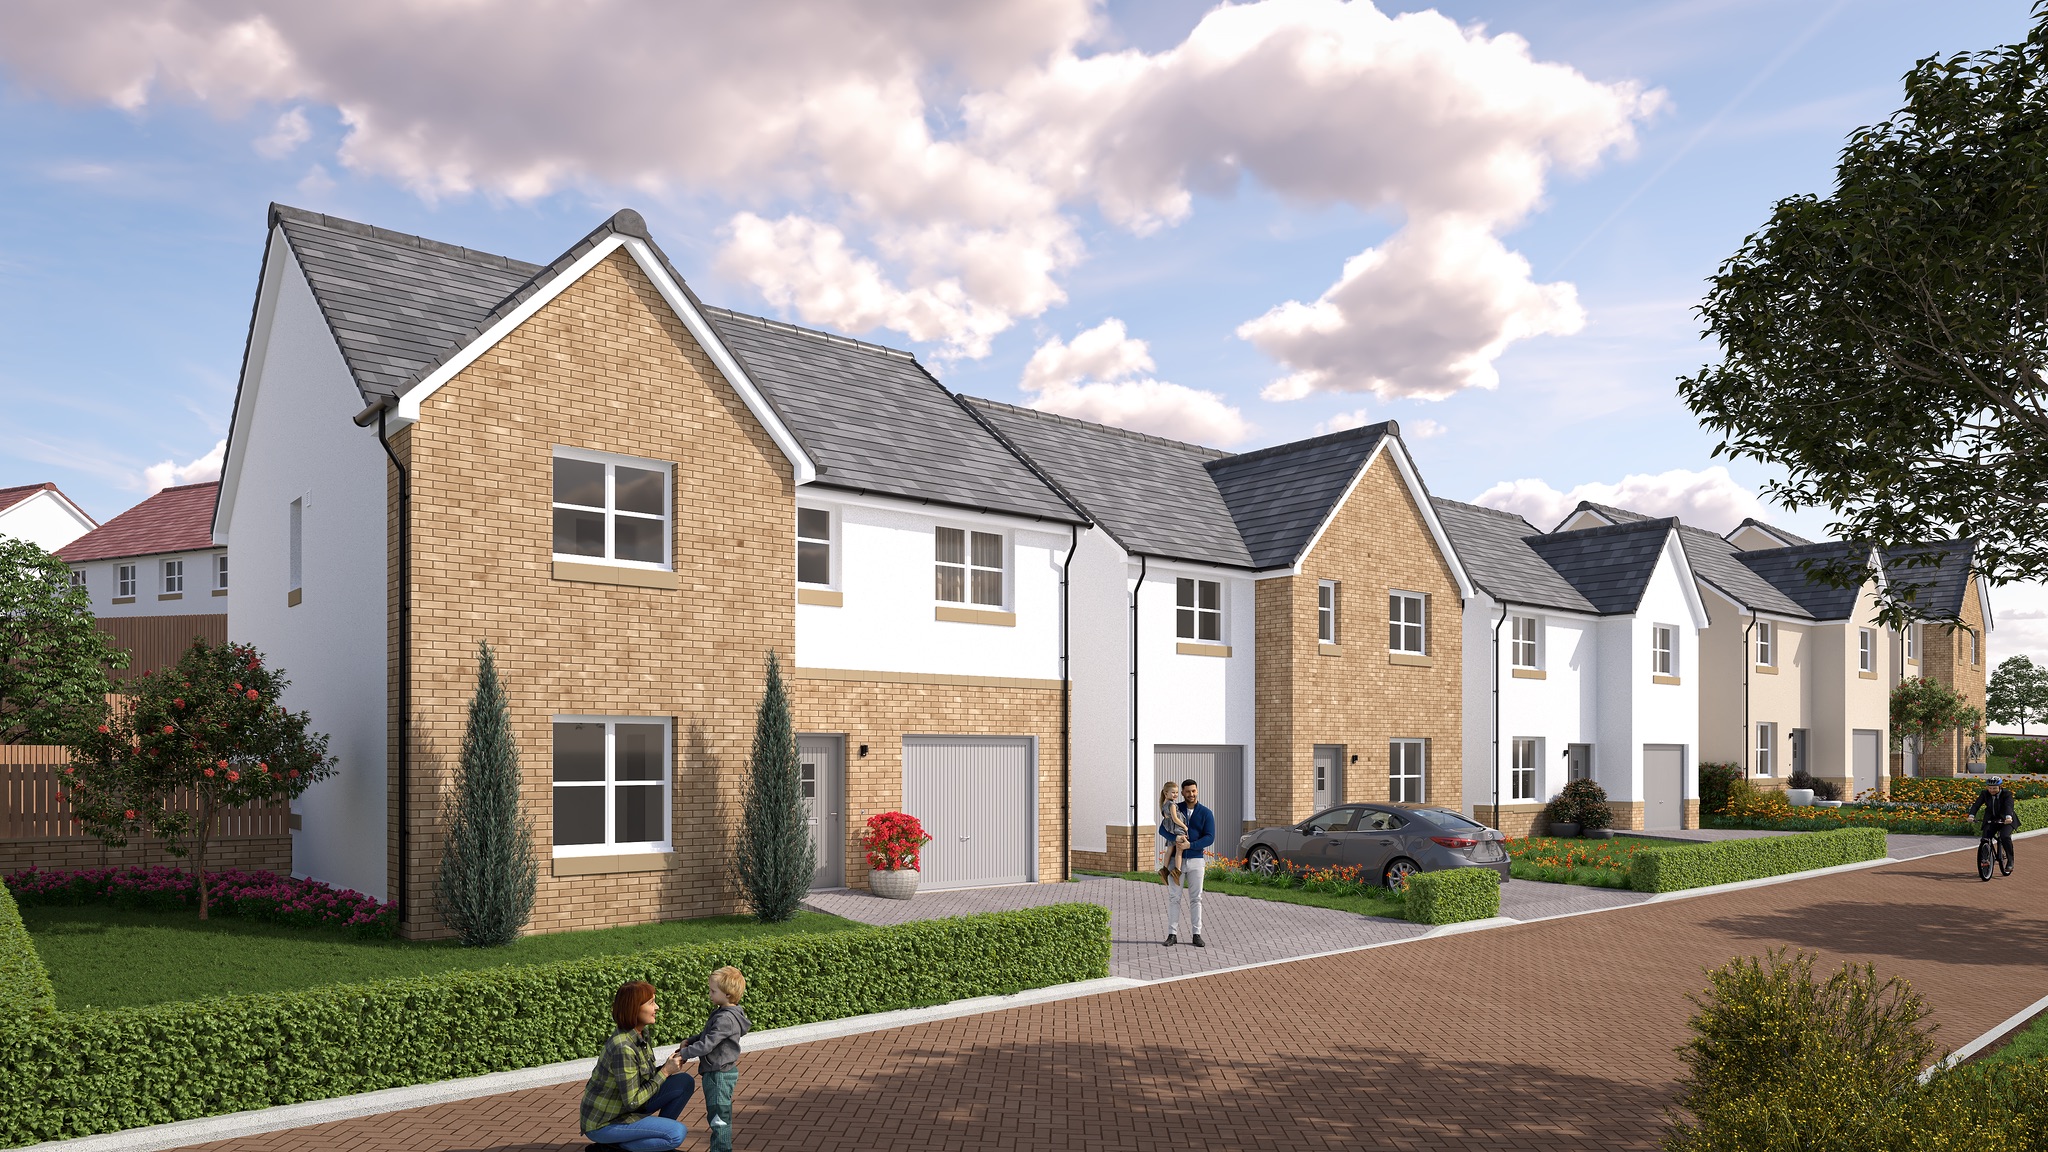 Property 2 of 8. CGI Street View Of Wellwater Grove